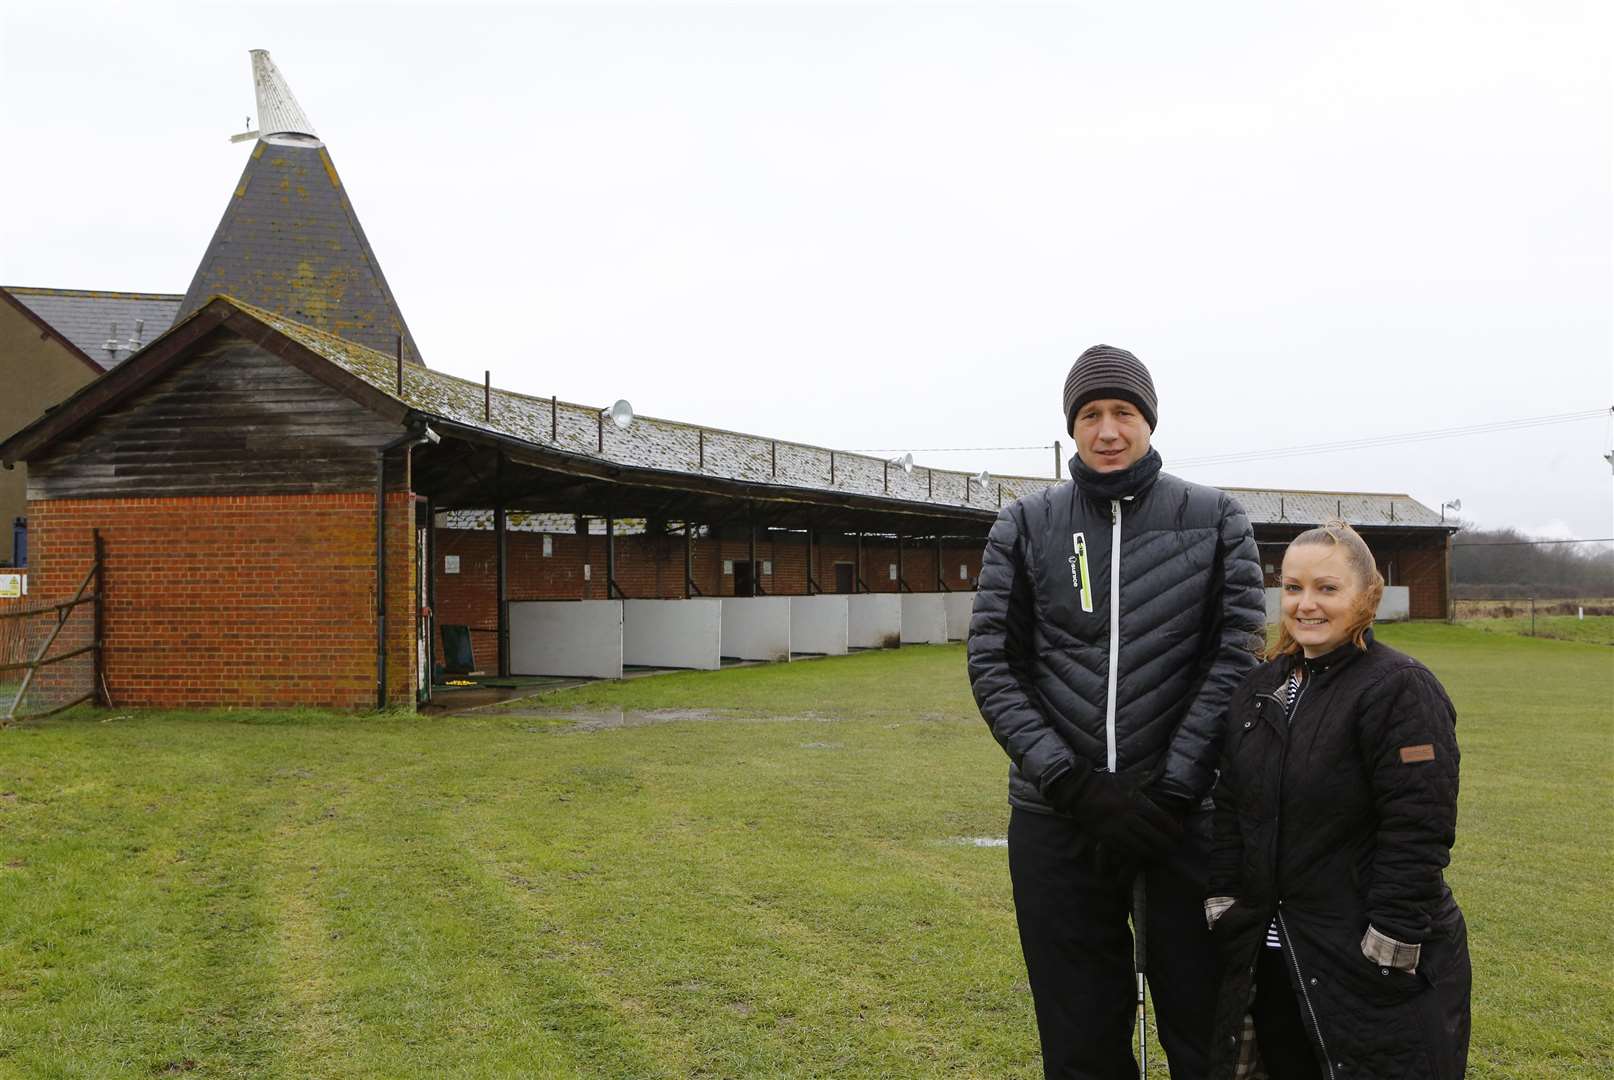 Sittingbourne Golf Centre is run by Peter and Rachel Appleyard. Picture: Andy Jones